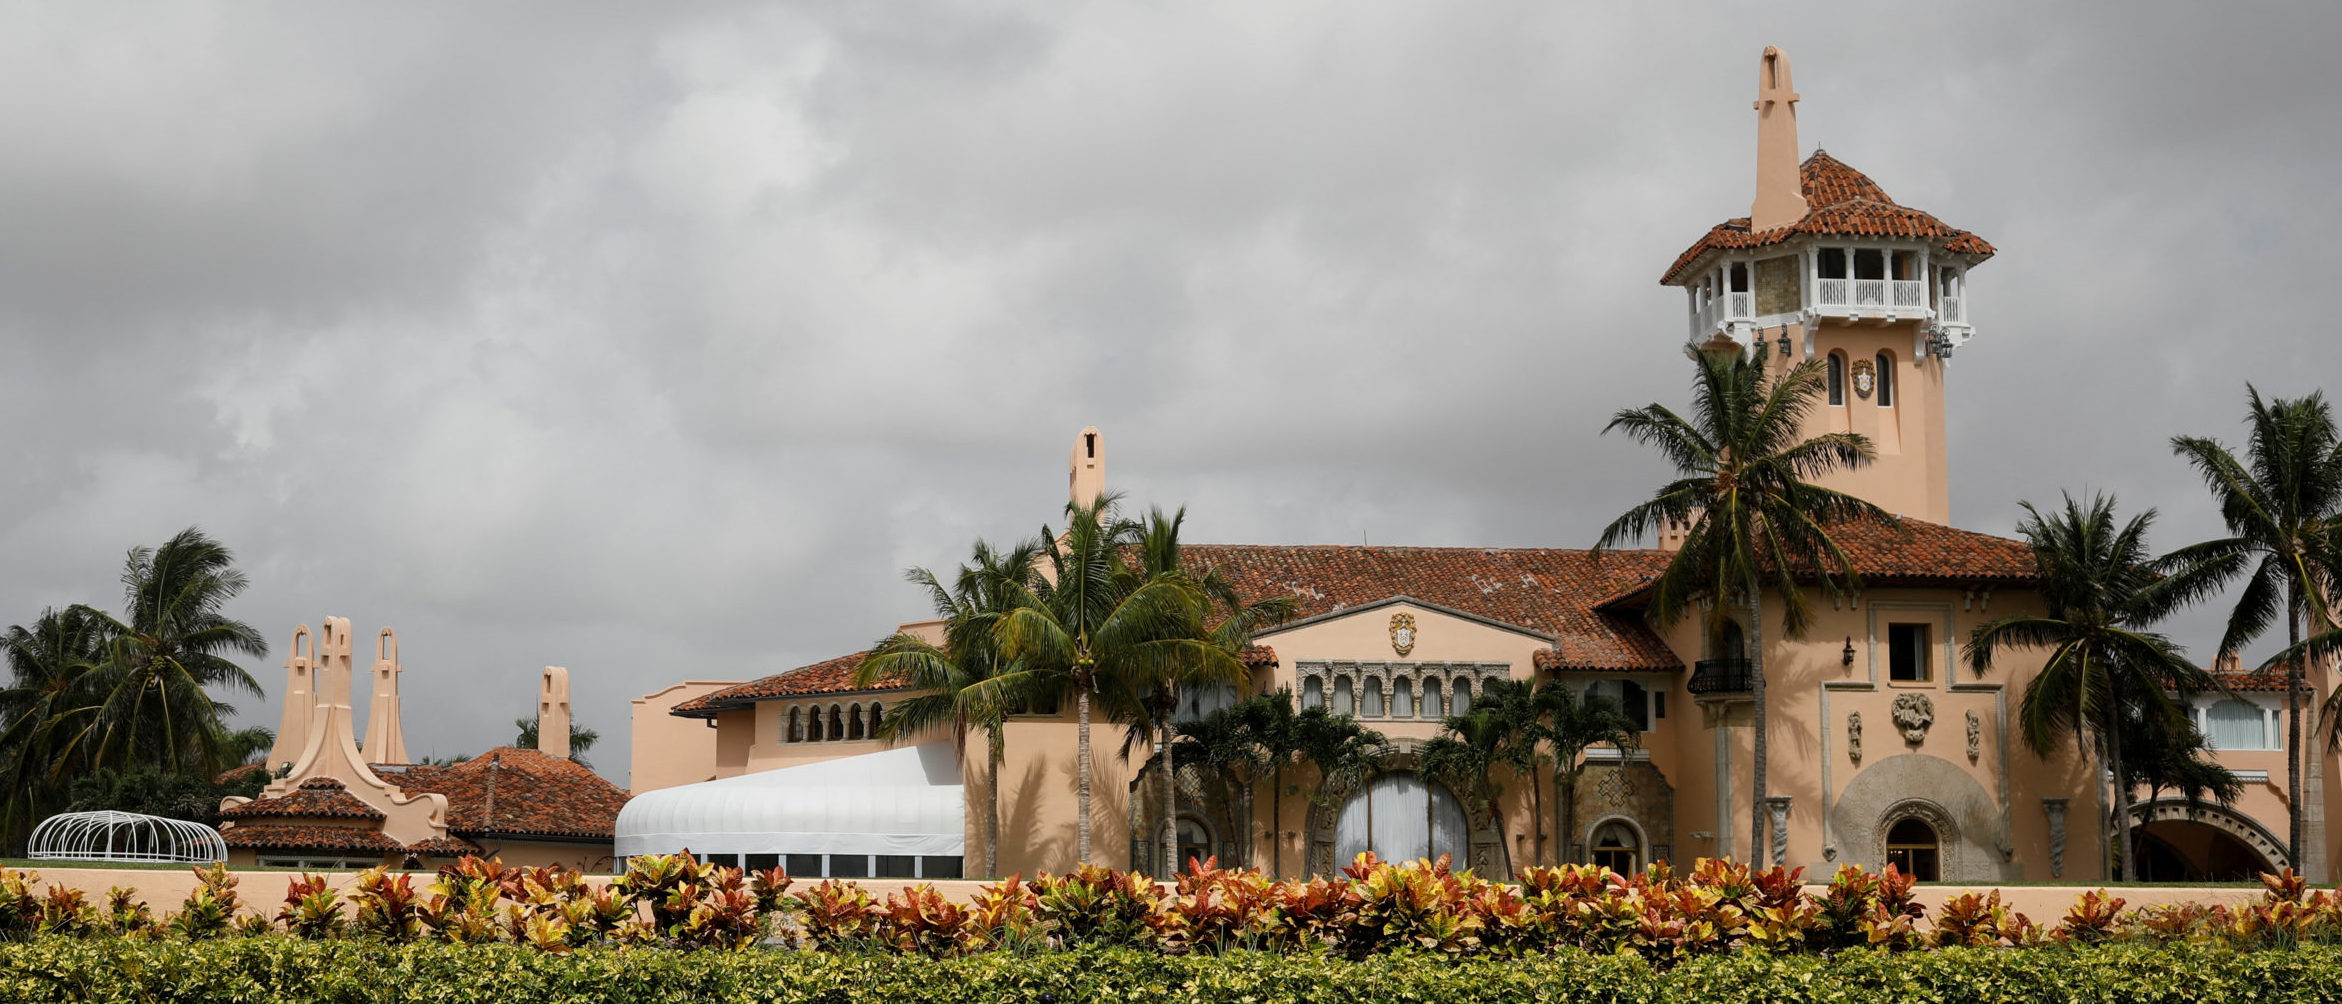 White House Was Likely Briefed Before FBI Raided Mar-a-Lago, Ex-FBI Agents Say